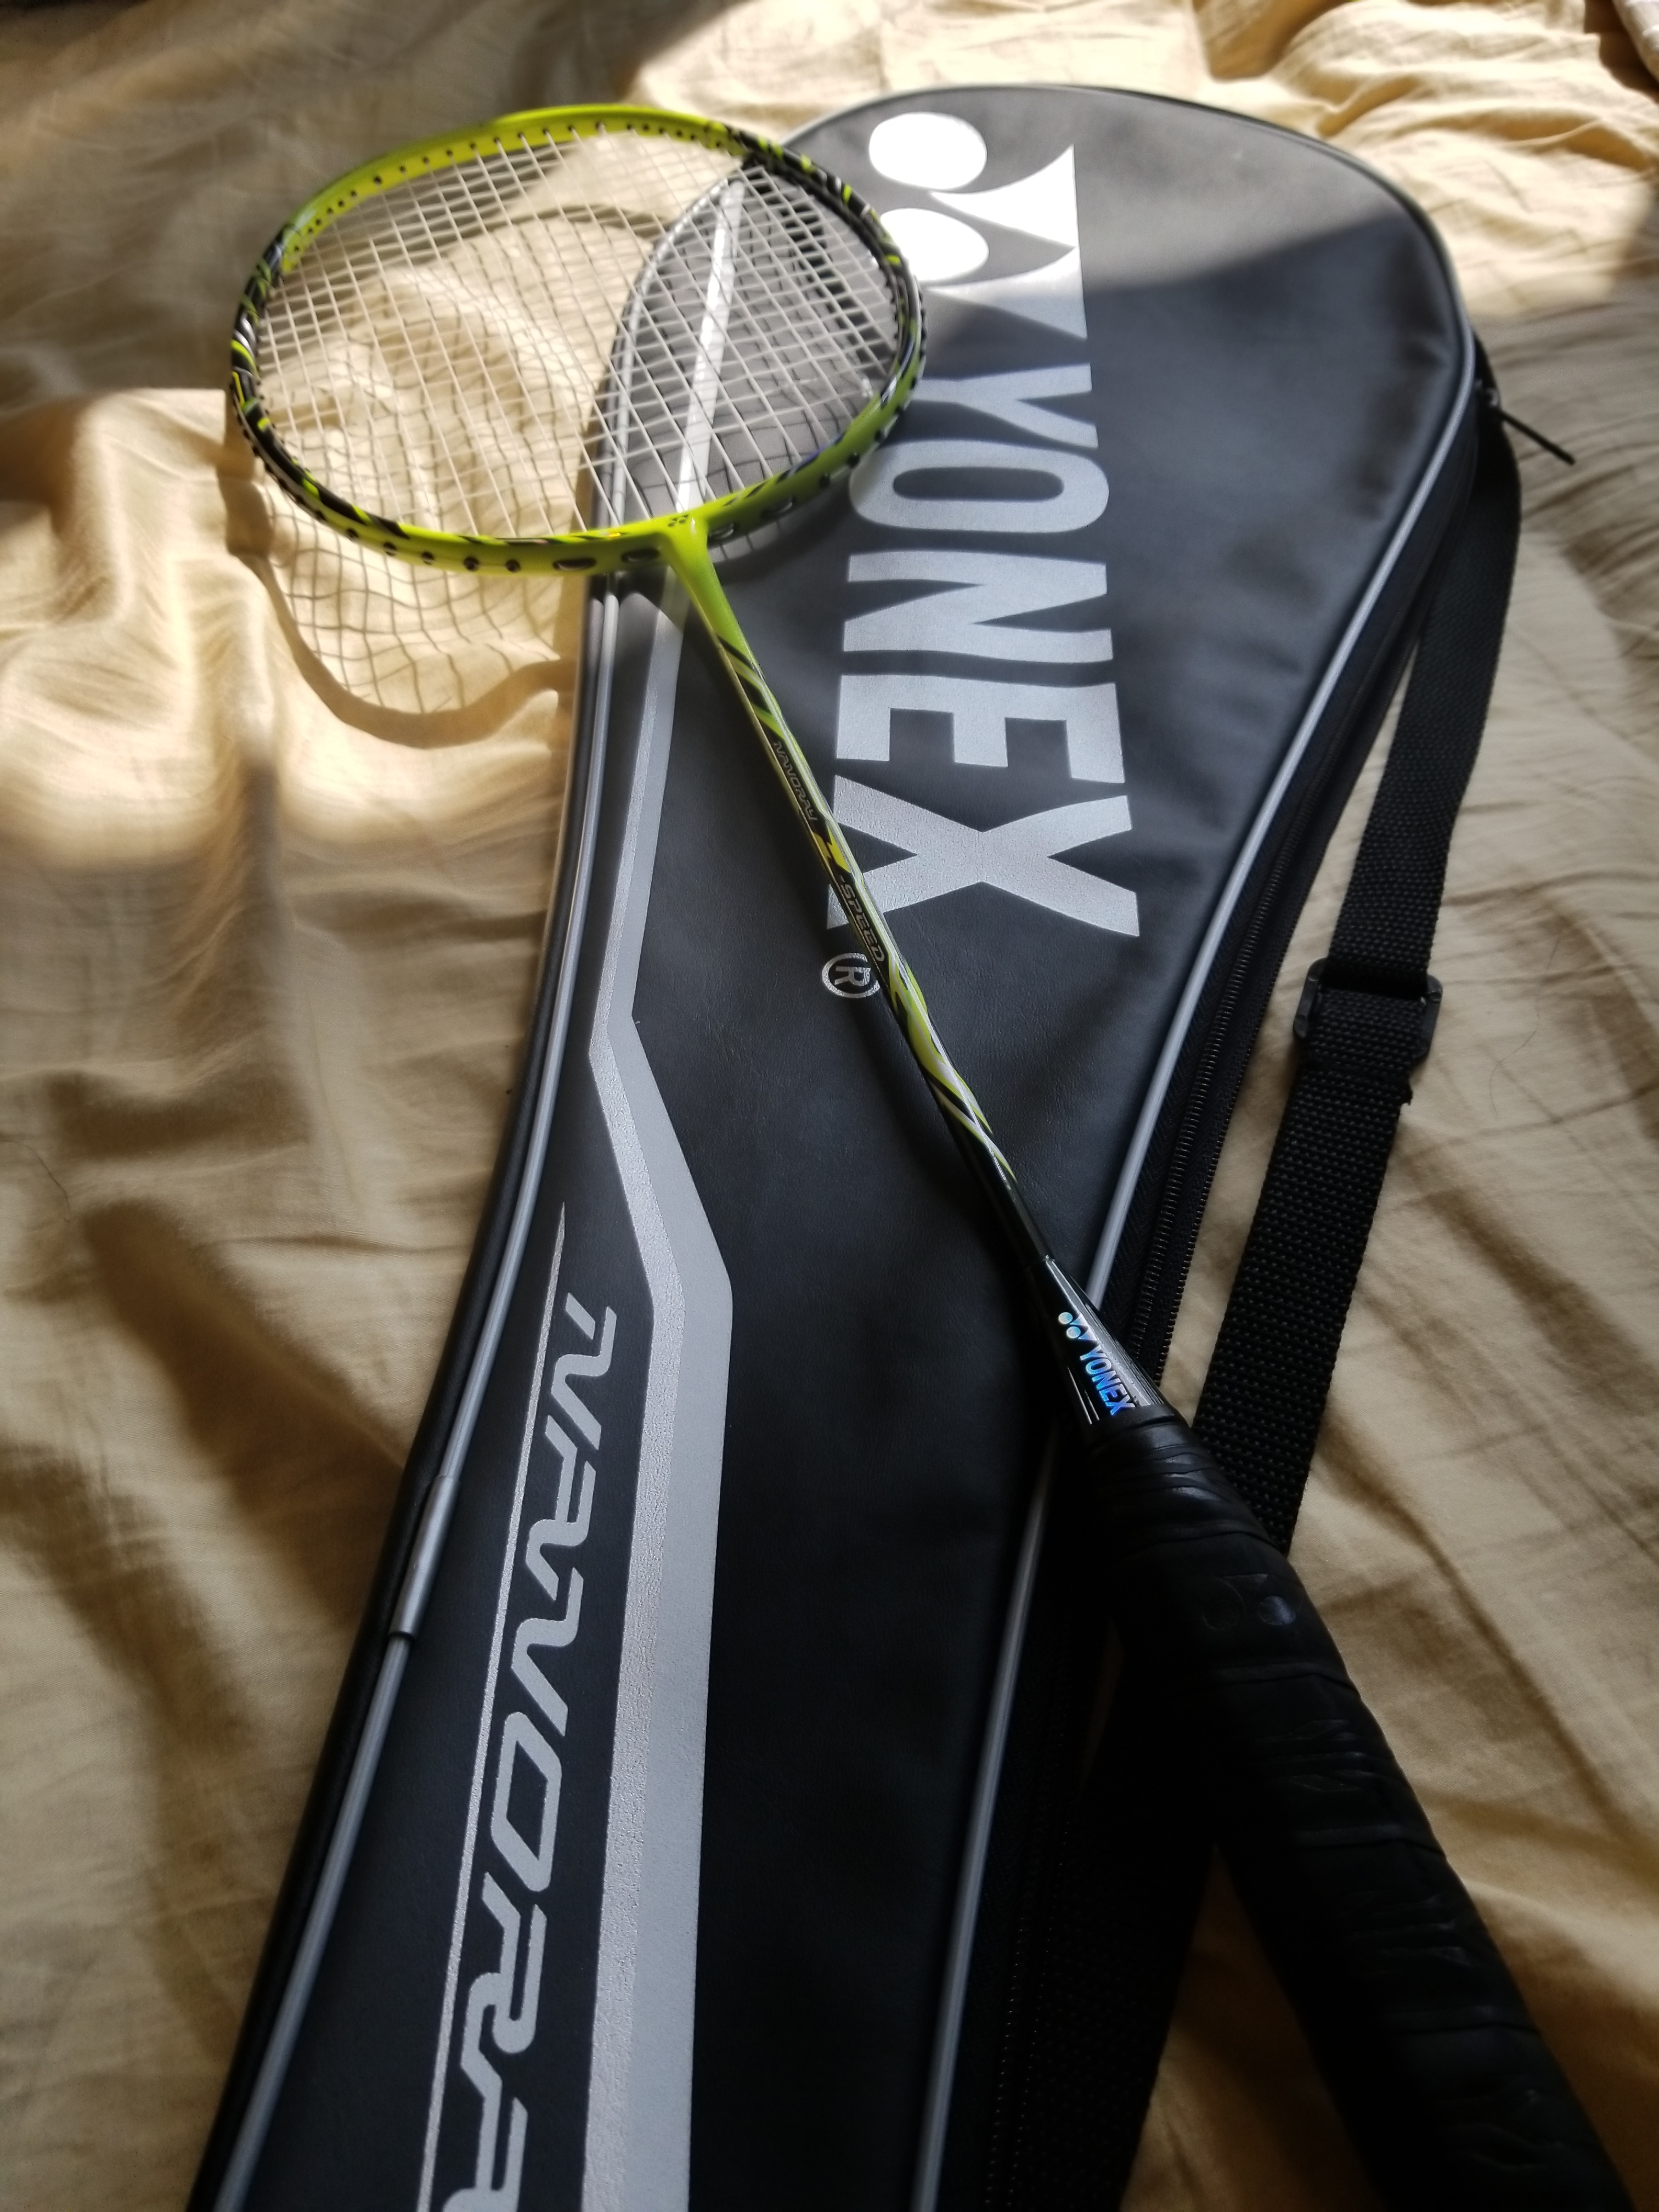 Yonex Nanoray Z Speed Badminton Racket Review - Fast and Powerful